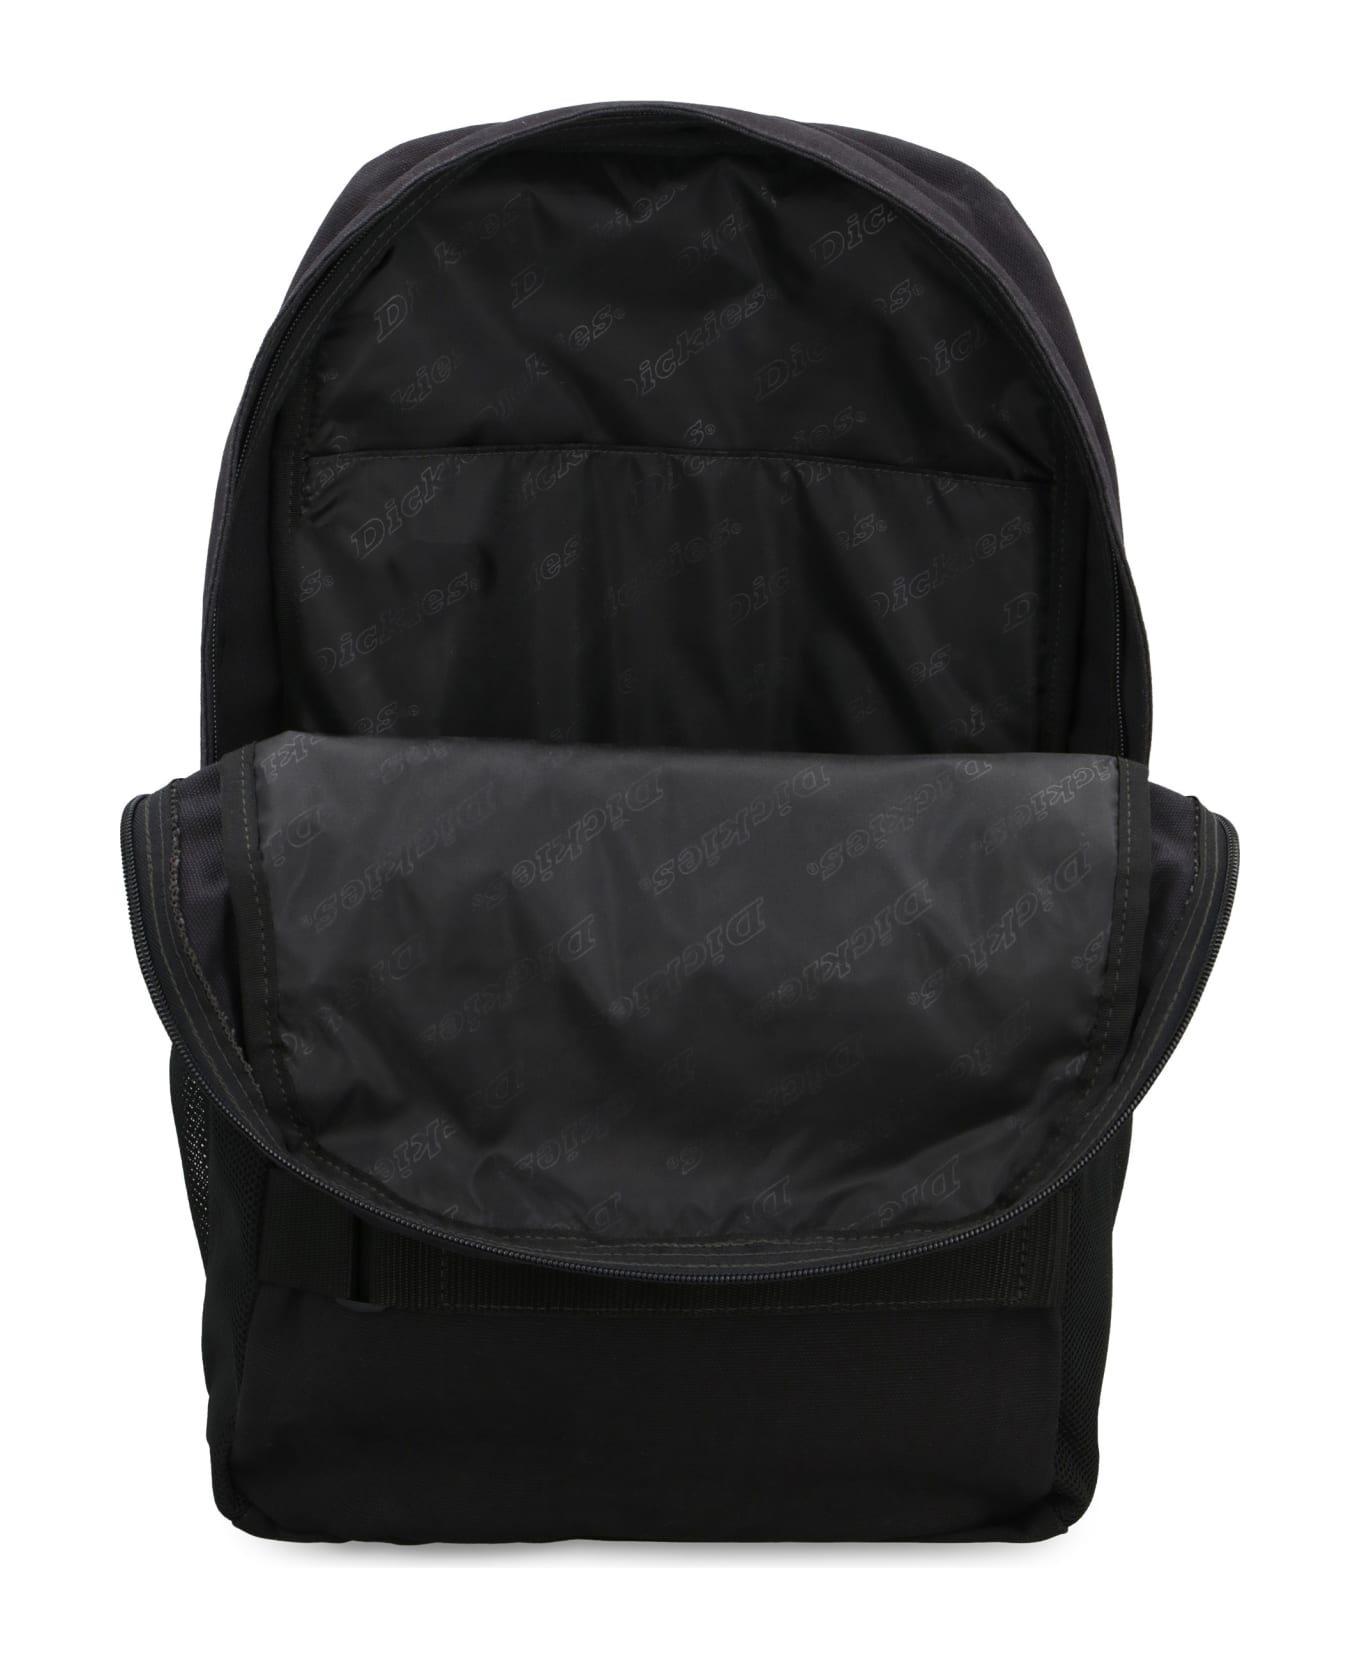 Dickies Canvas Backpack - black バックパック